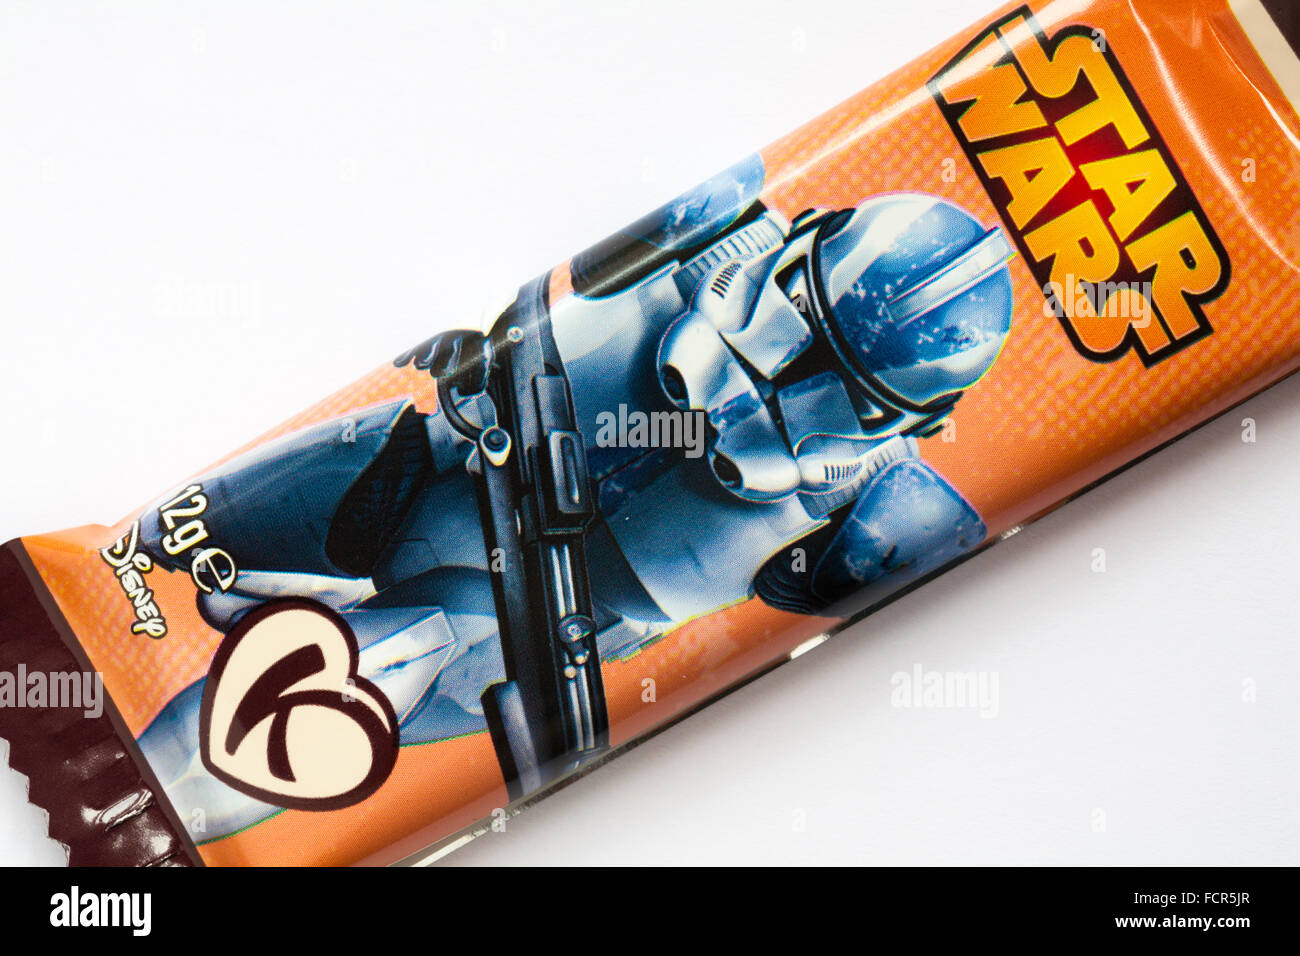 Star Wars chocolate bar from Star Wars 9 piece selection box chocolates from Kinnerton set on white background Stock Photo